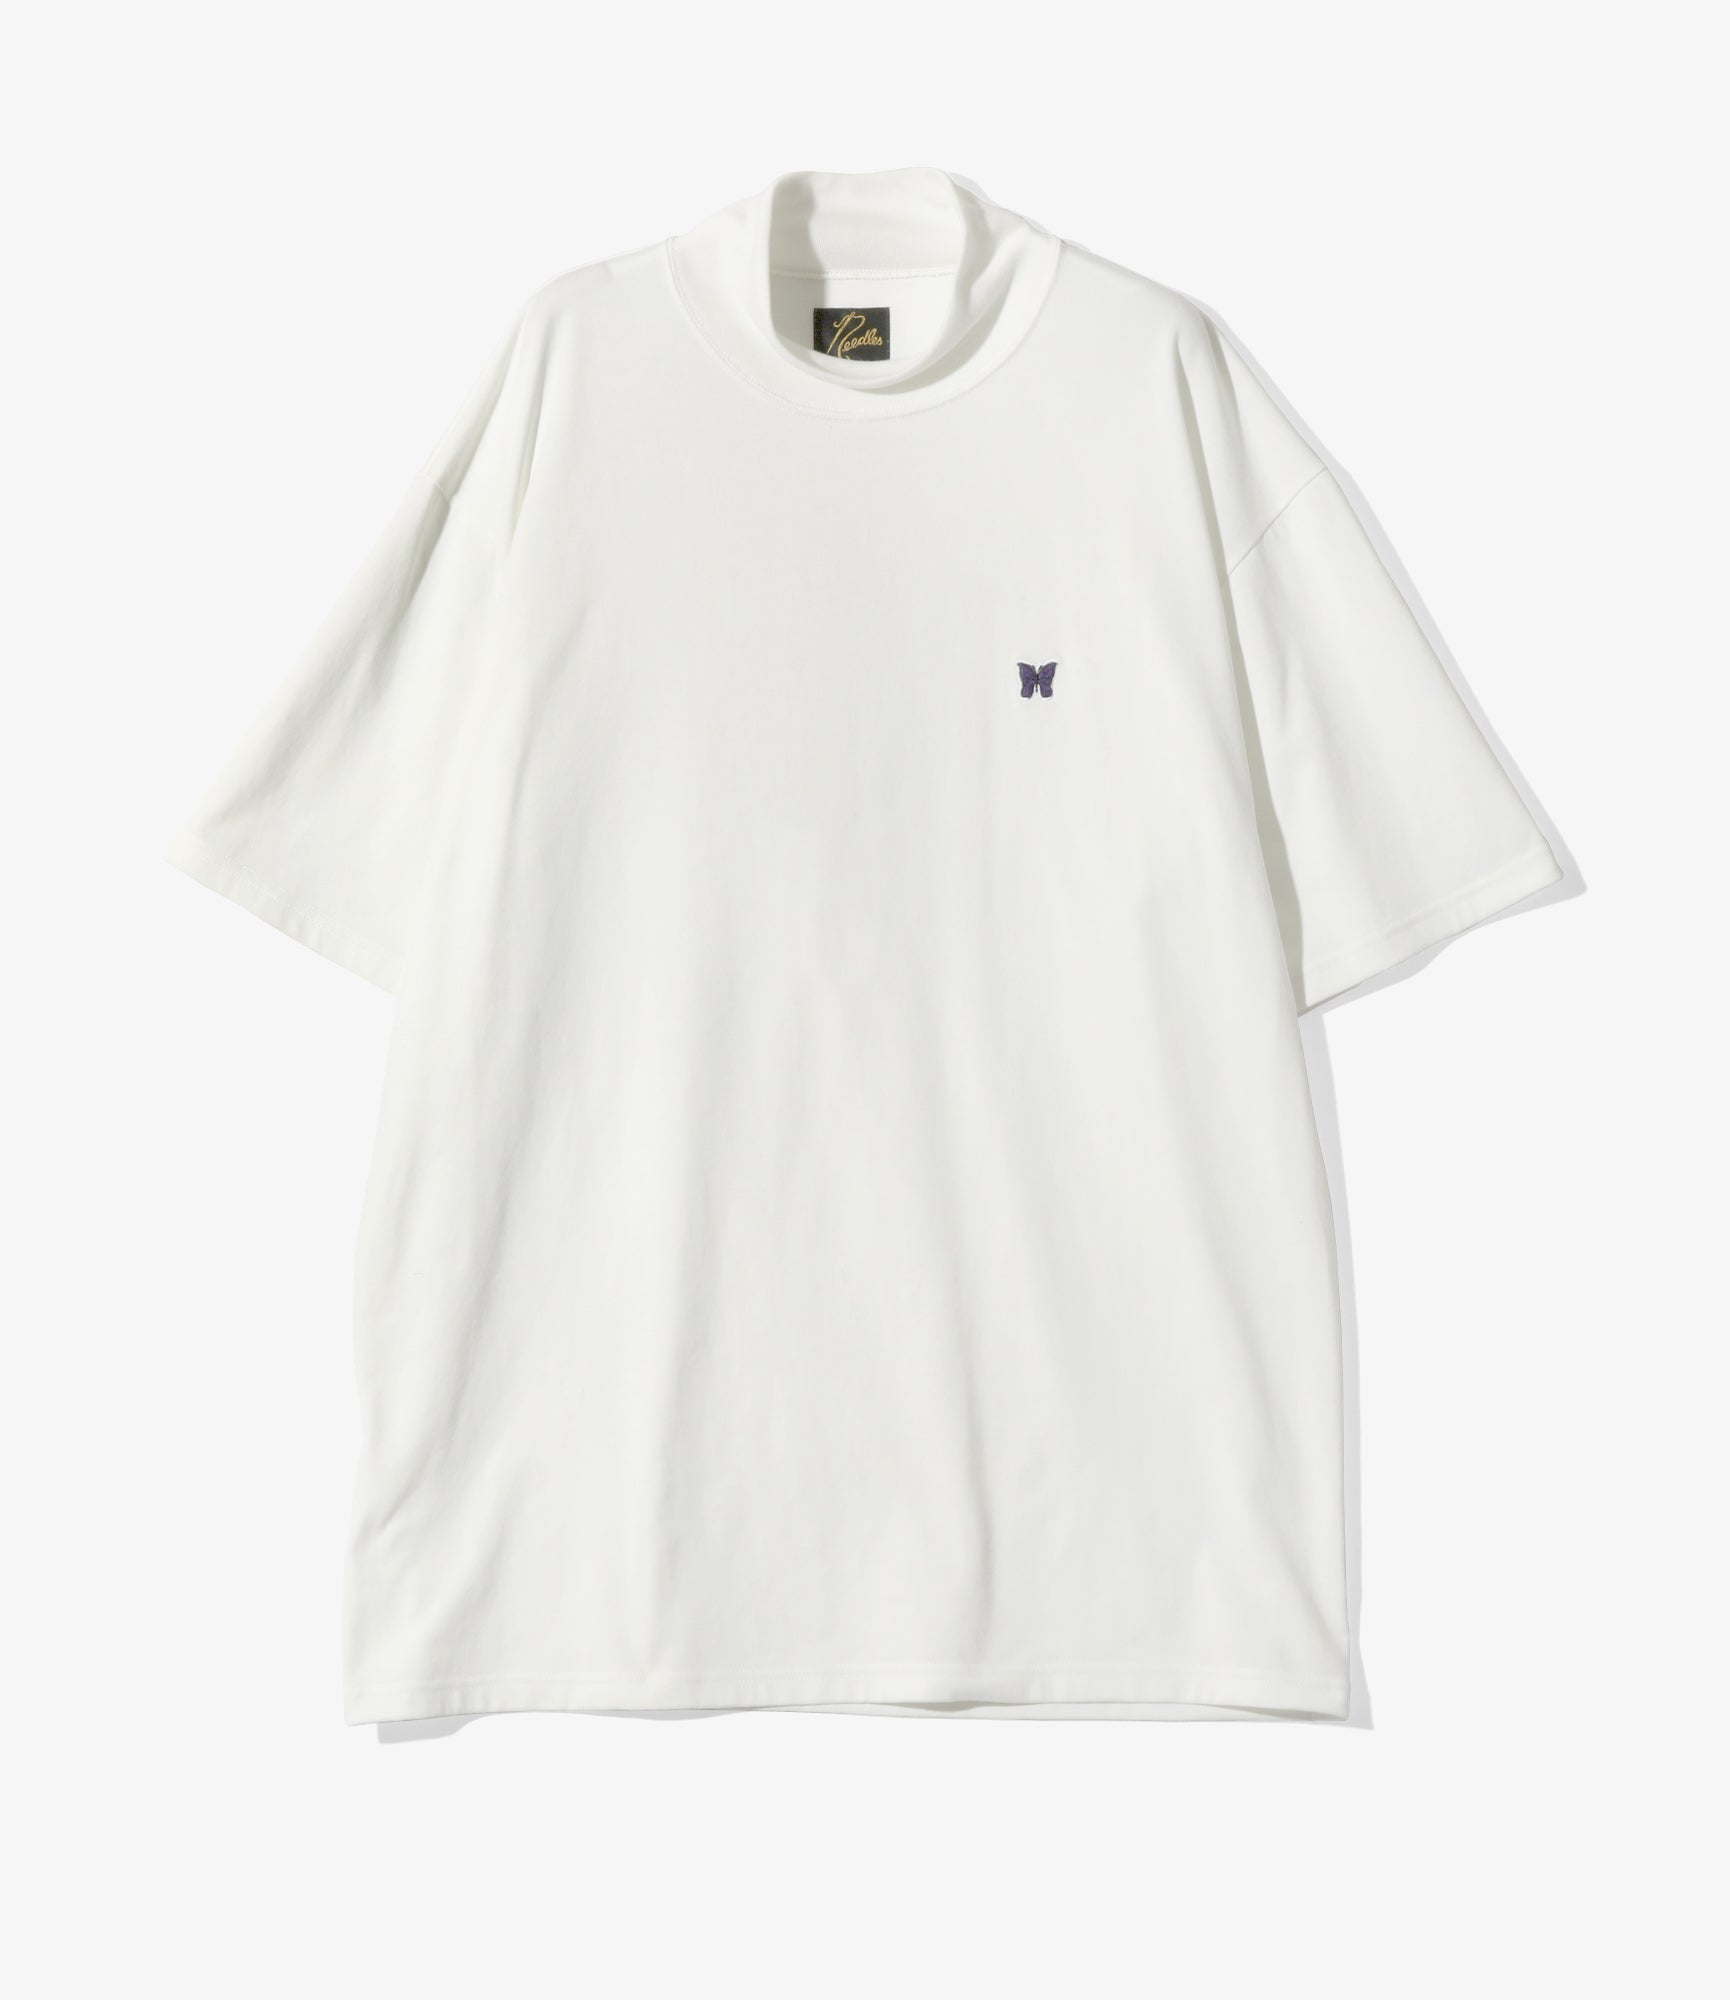 S/S Mock Neck Tee - White - Poly Jersey